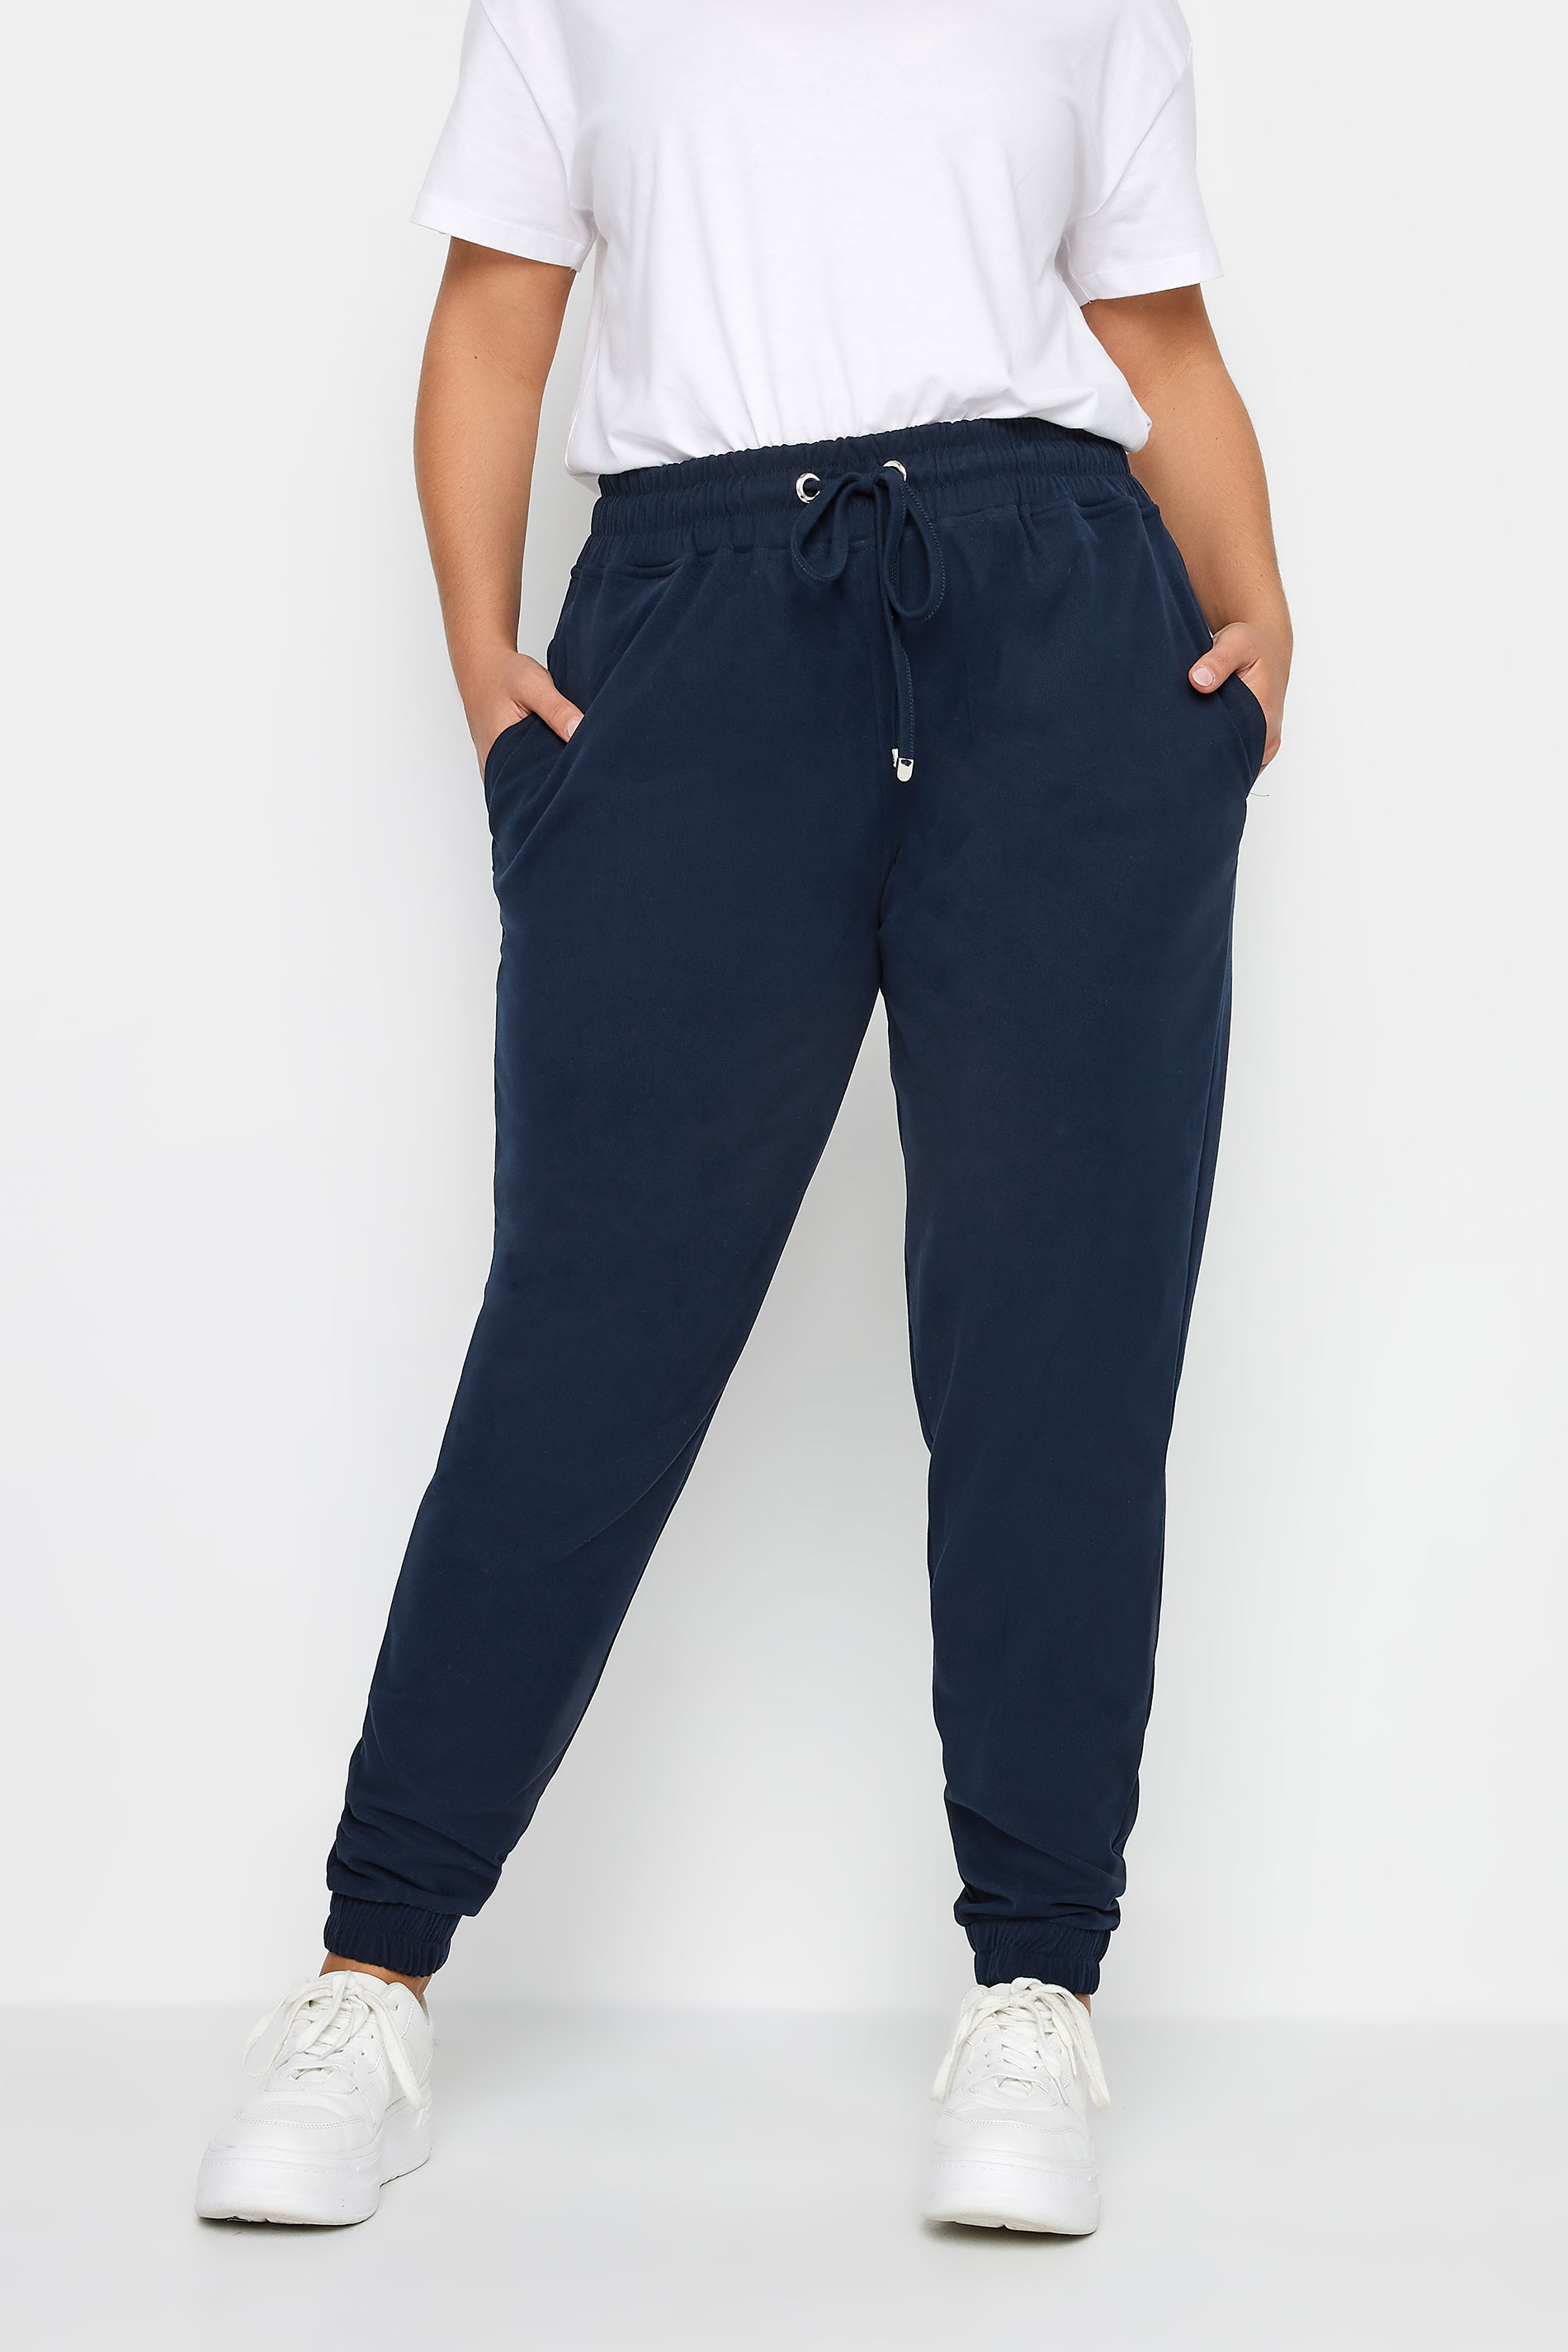 YOURS Curve Navy Blue Stretch Cuffed Joggers | Yours Clothing 1